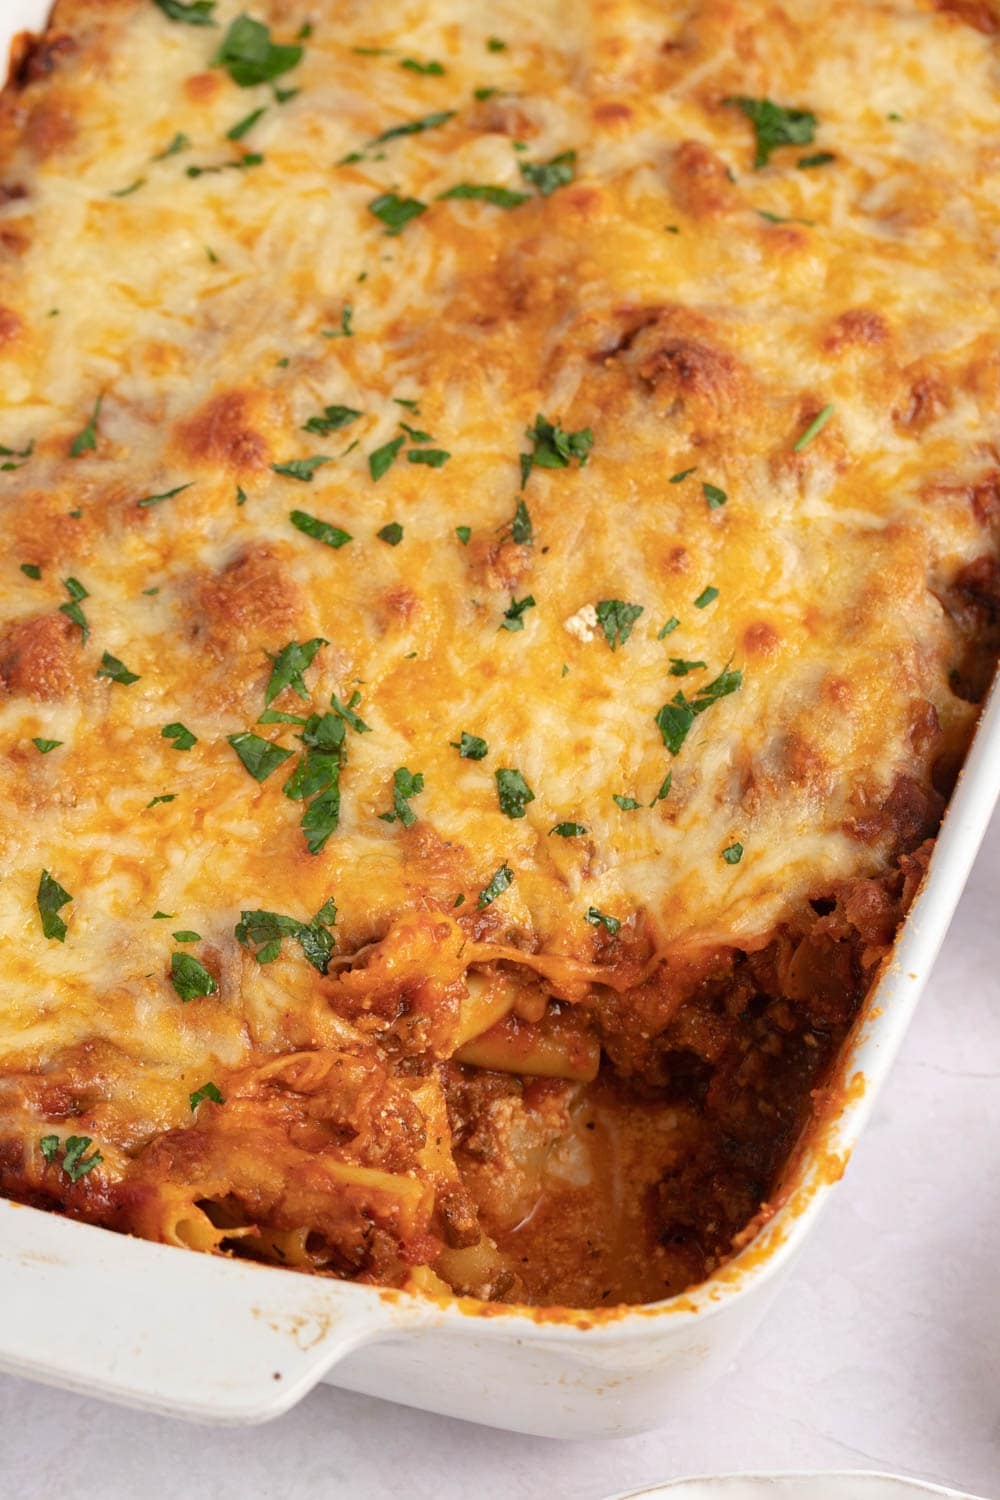 Savory Homemade Baked Ziti with Ground Beef, Onions and Cheese